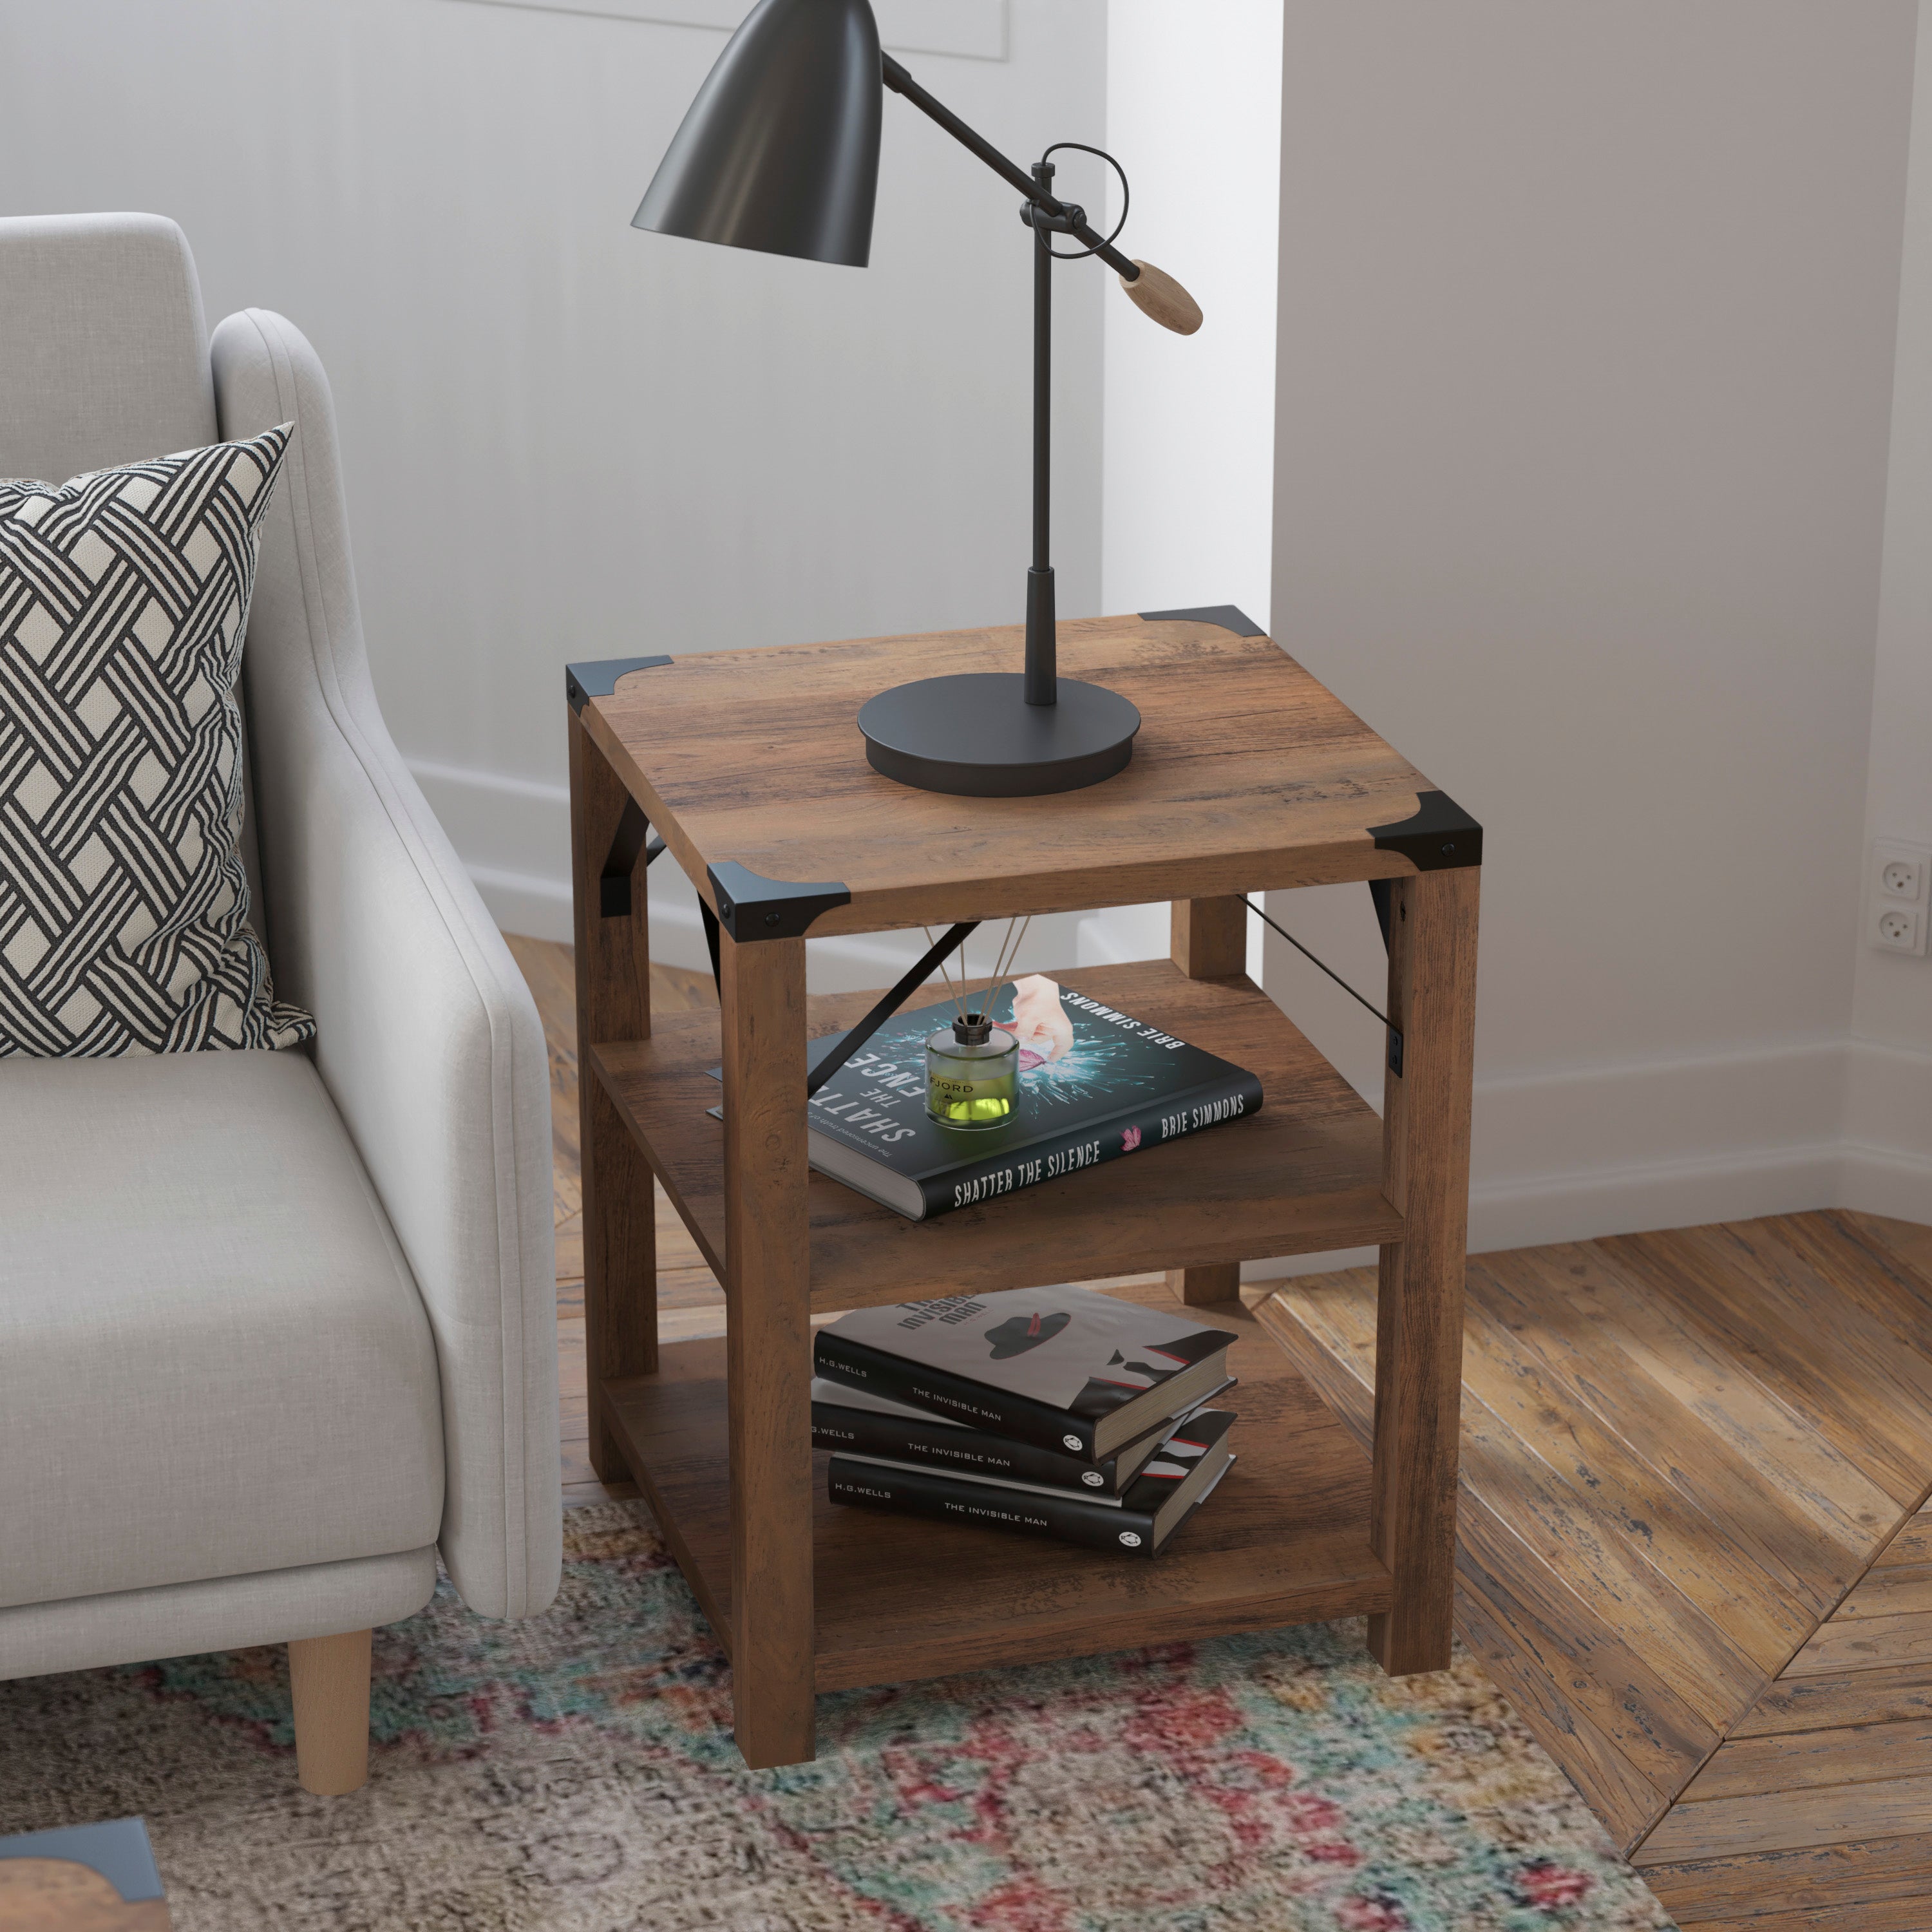 Wyatt Modern Farmhouse Wooden 3 Tier End Table with Metal Corner Accents and Cross Bracing-End Table-Flash Furniture-Wall2Wall Furnishings